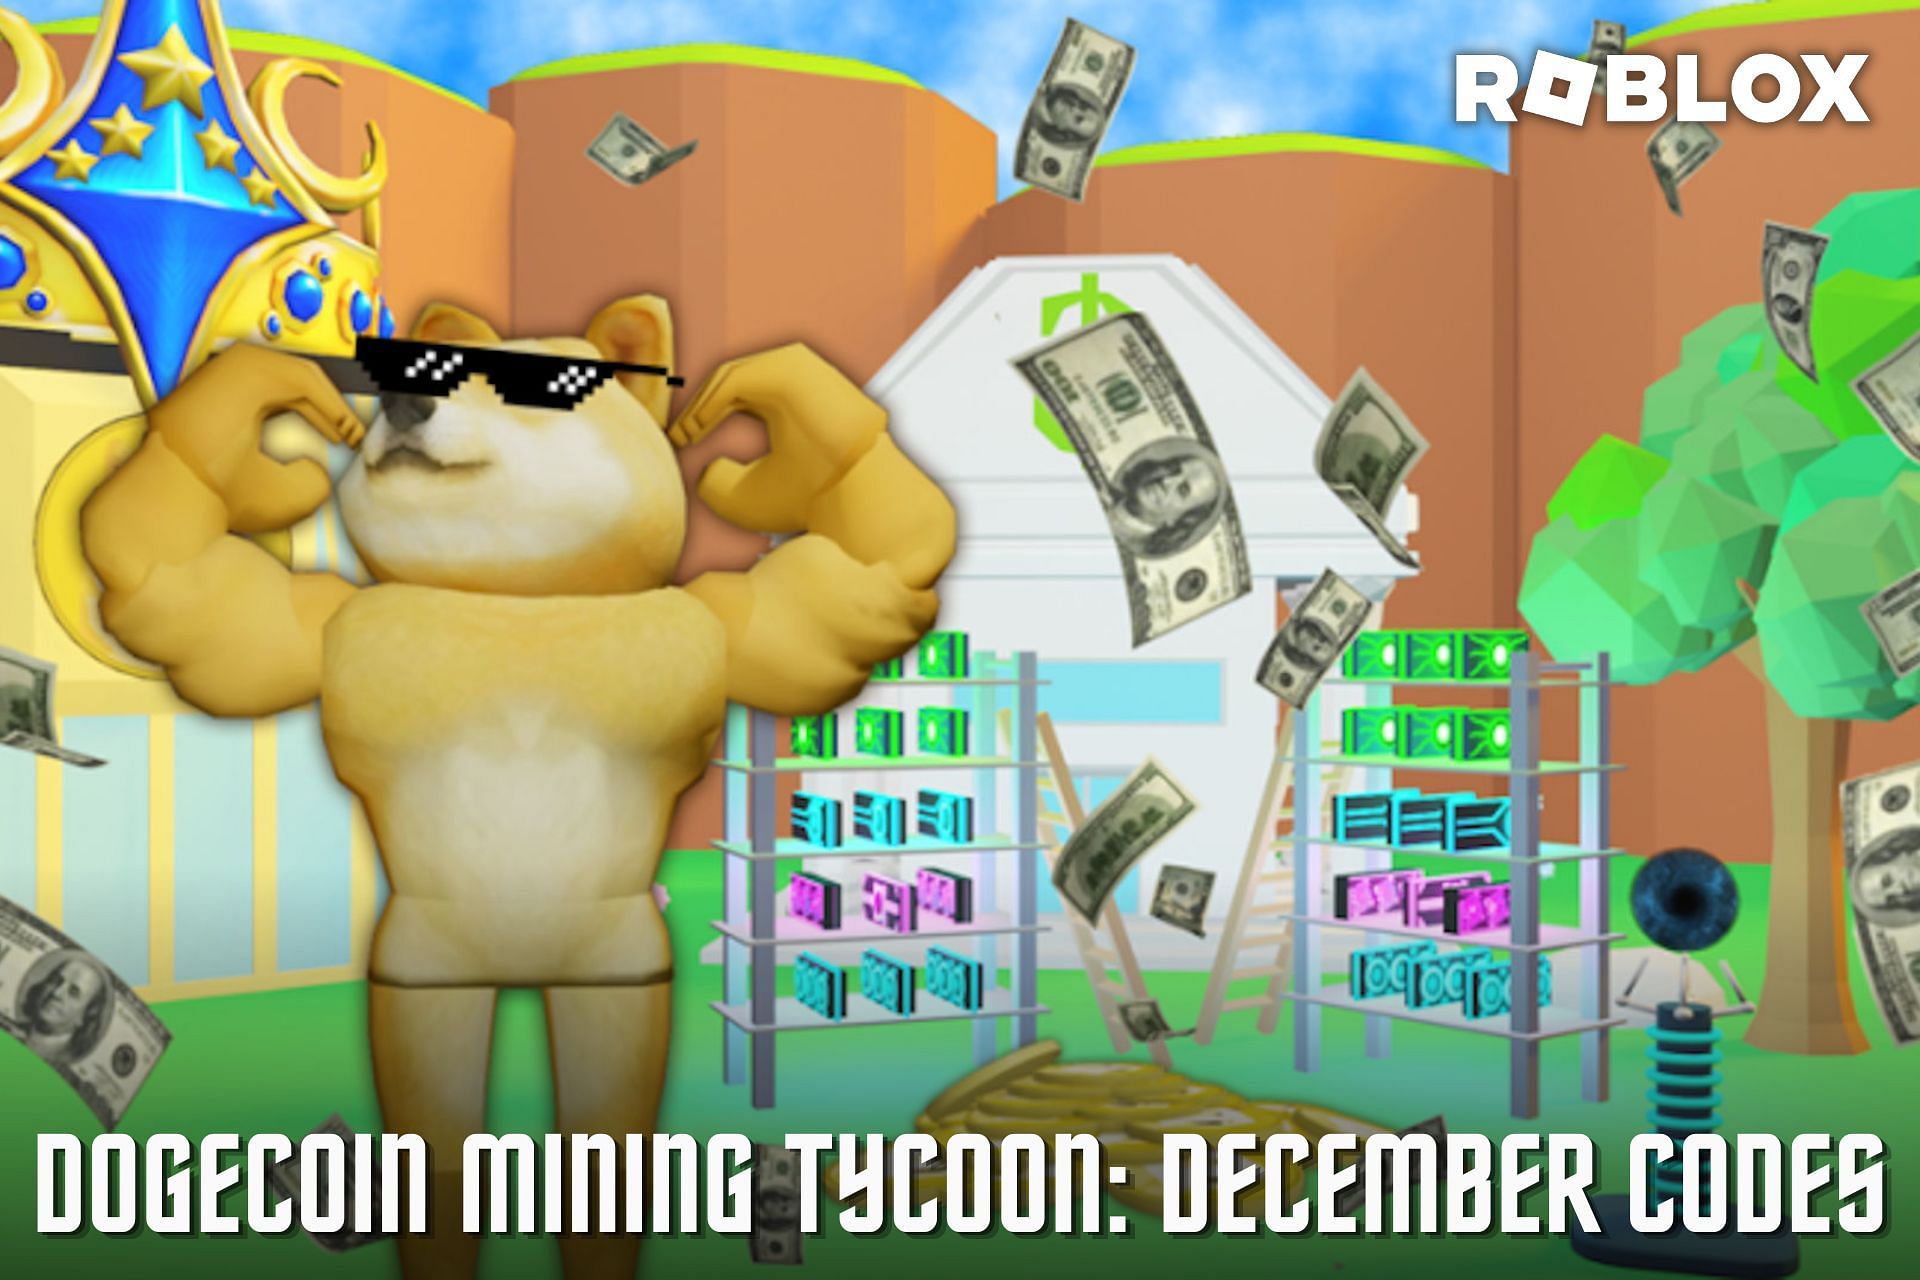 roblox-dogecoin-mining-tycoon-codes-for-december-2022-free-coins-coolers-and-more